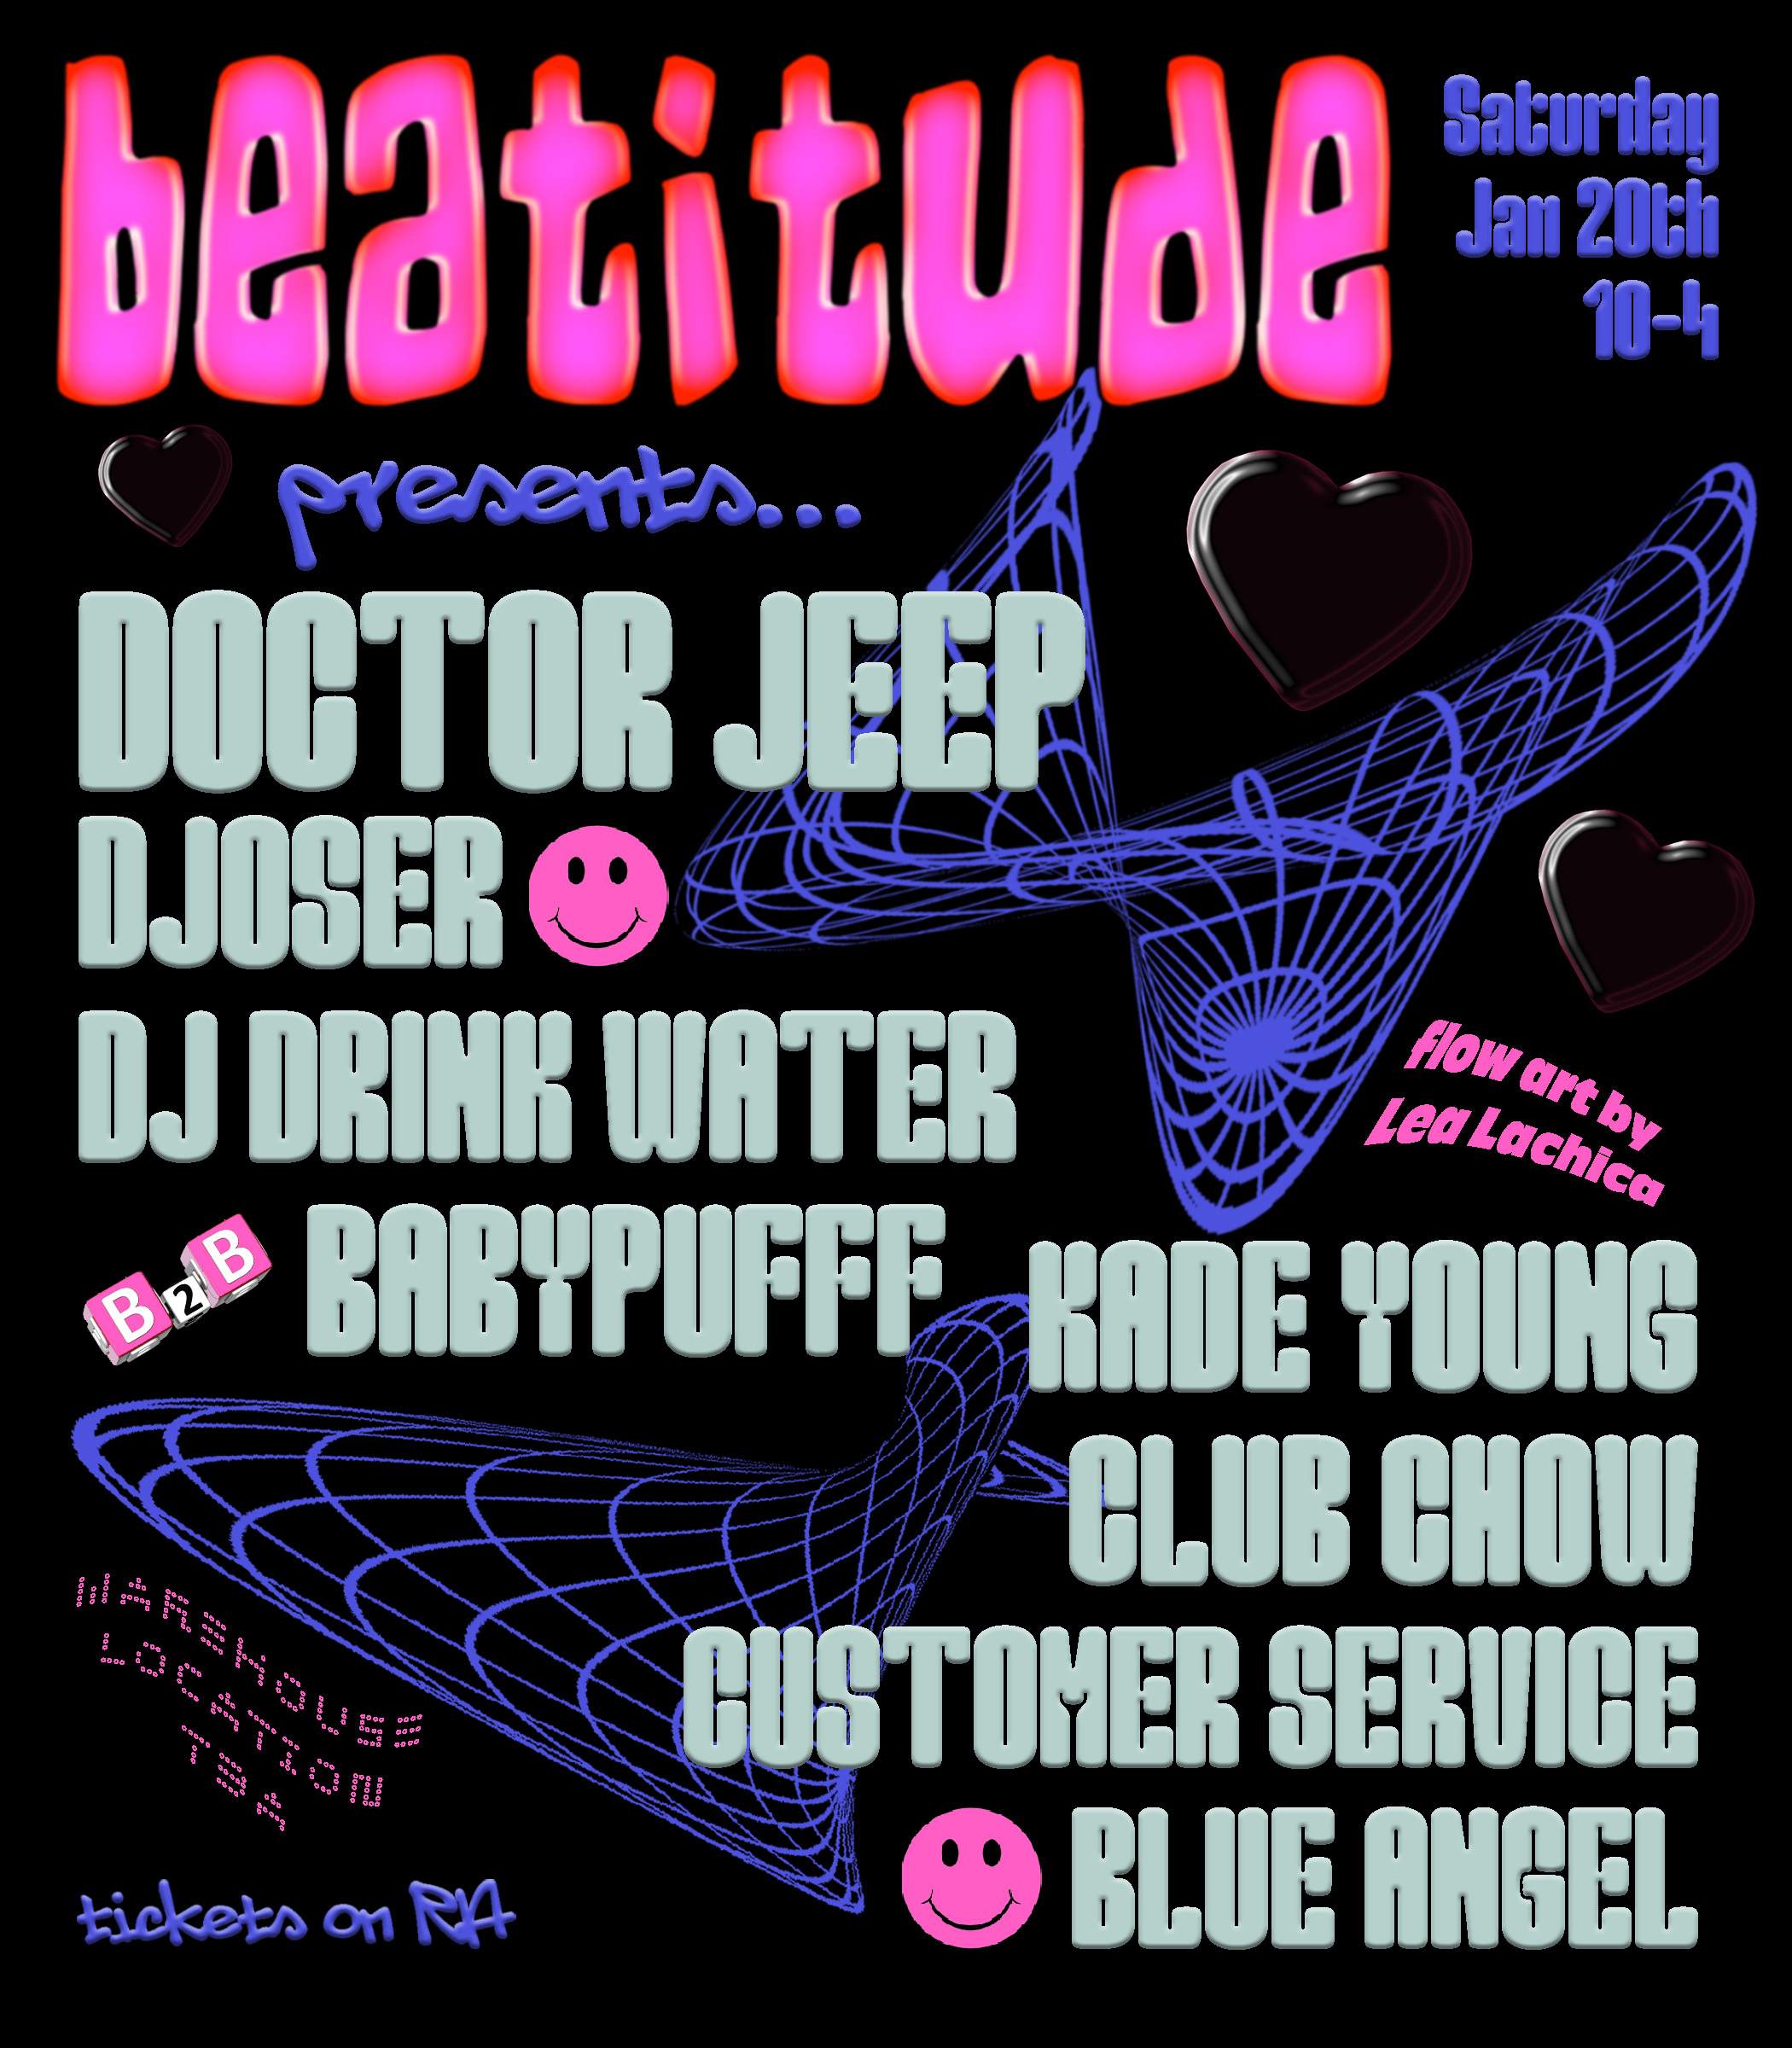 Beatitude w/ Doctor Jeep, Djoser, Kade Young, Club Chow, & more - フライヤー表